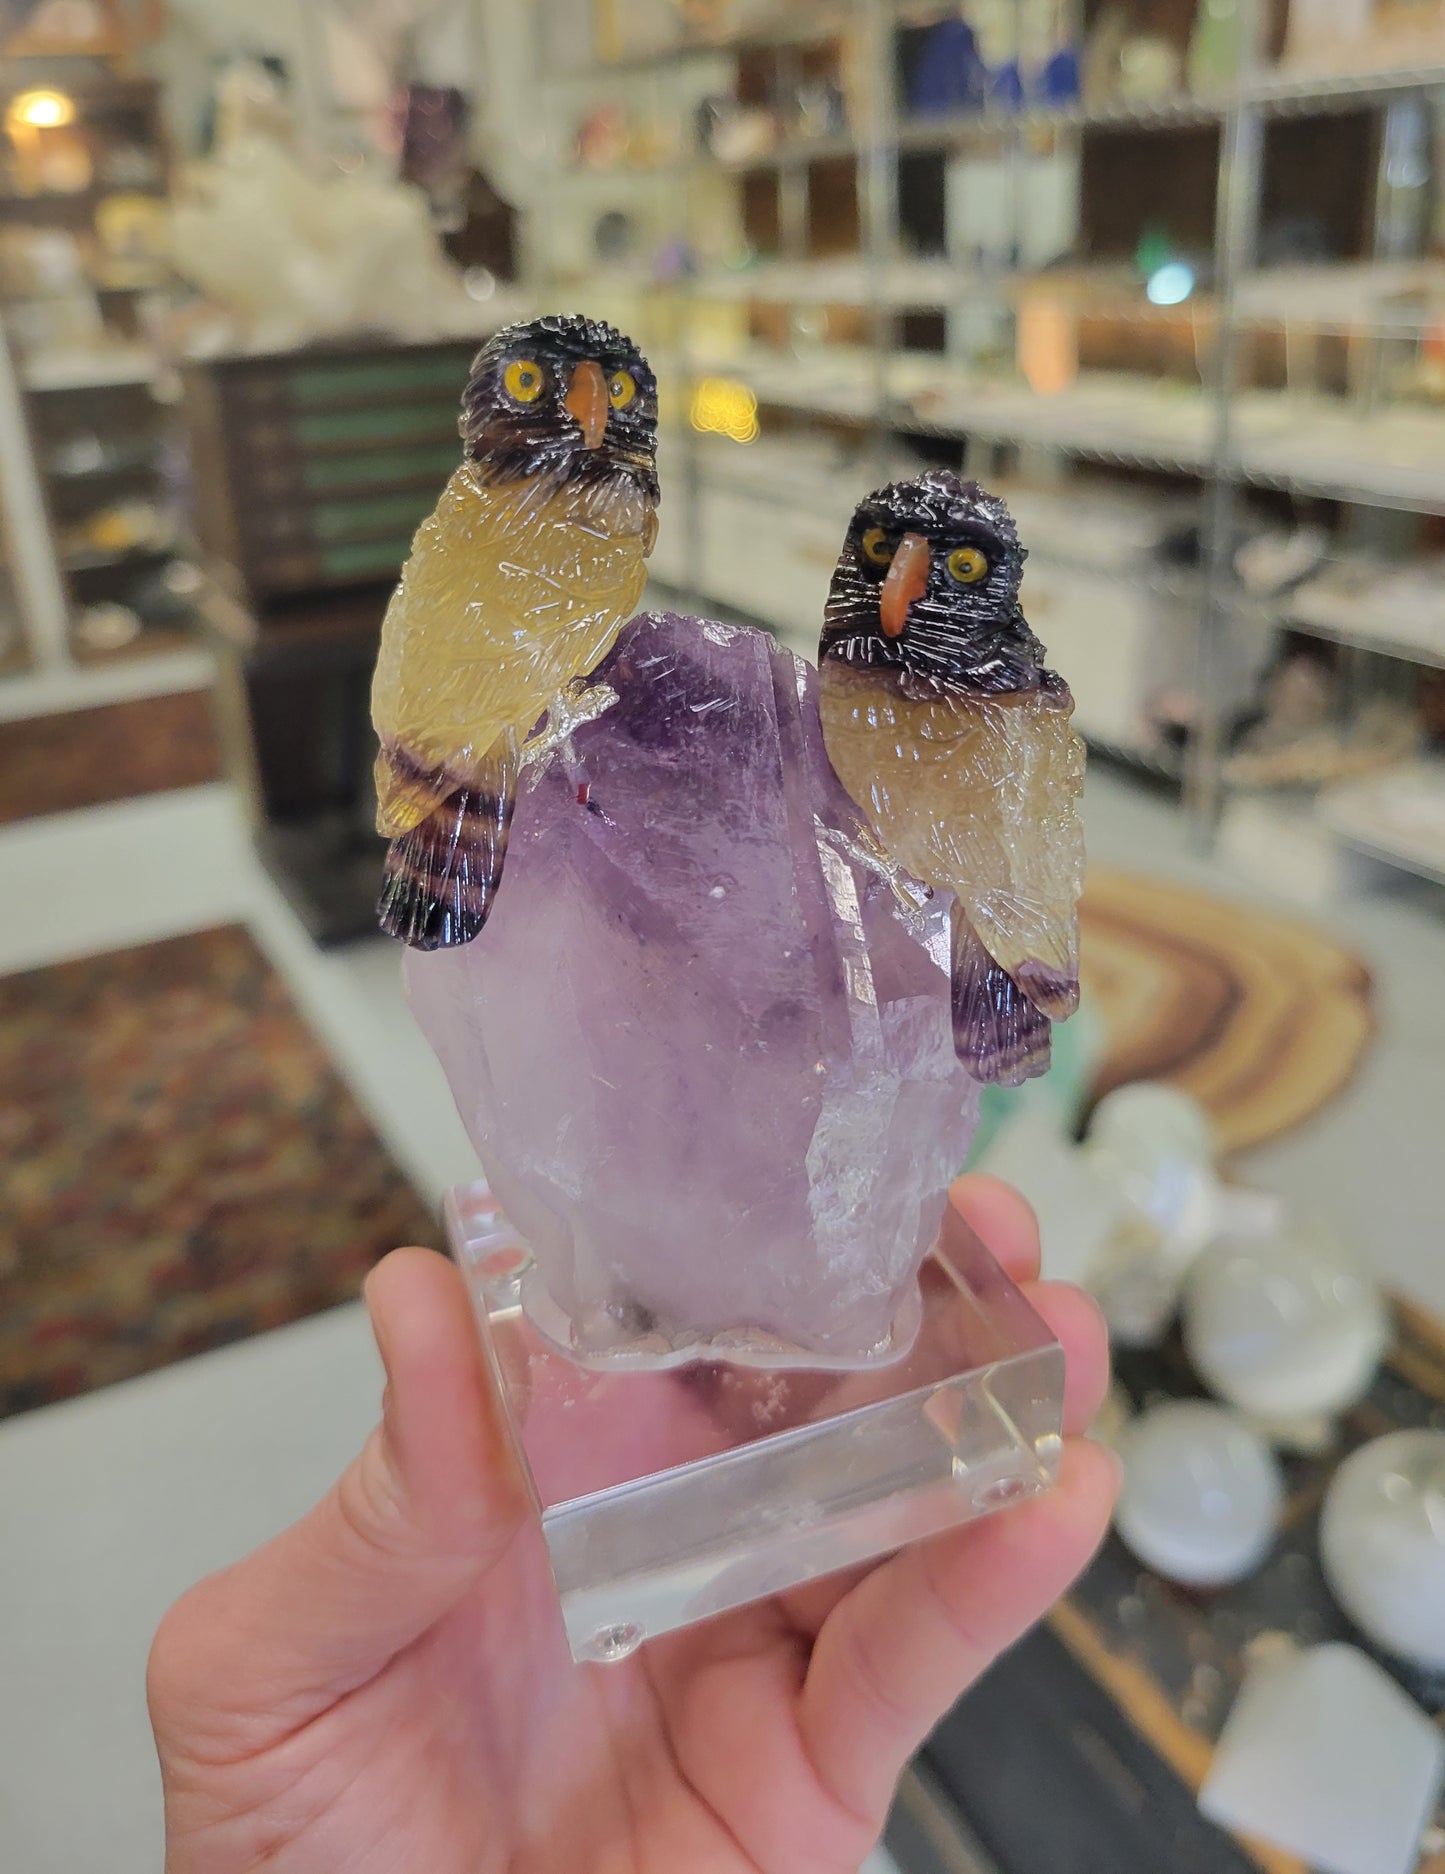 Peter Muller Collection, Rainbow Fluorite Owls on Amethyst Carved and Polished in Brazil (W 3/4 inches, 2 1/8 inches from head to tail)